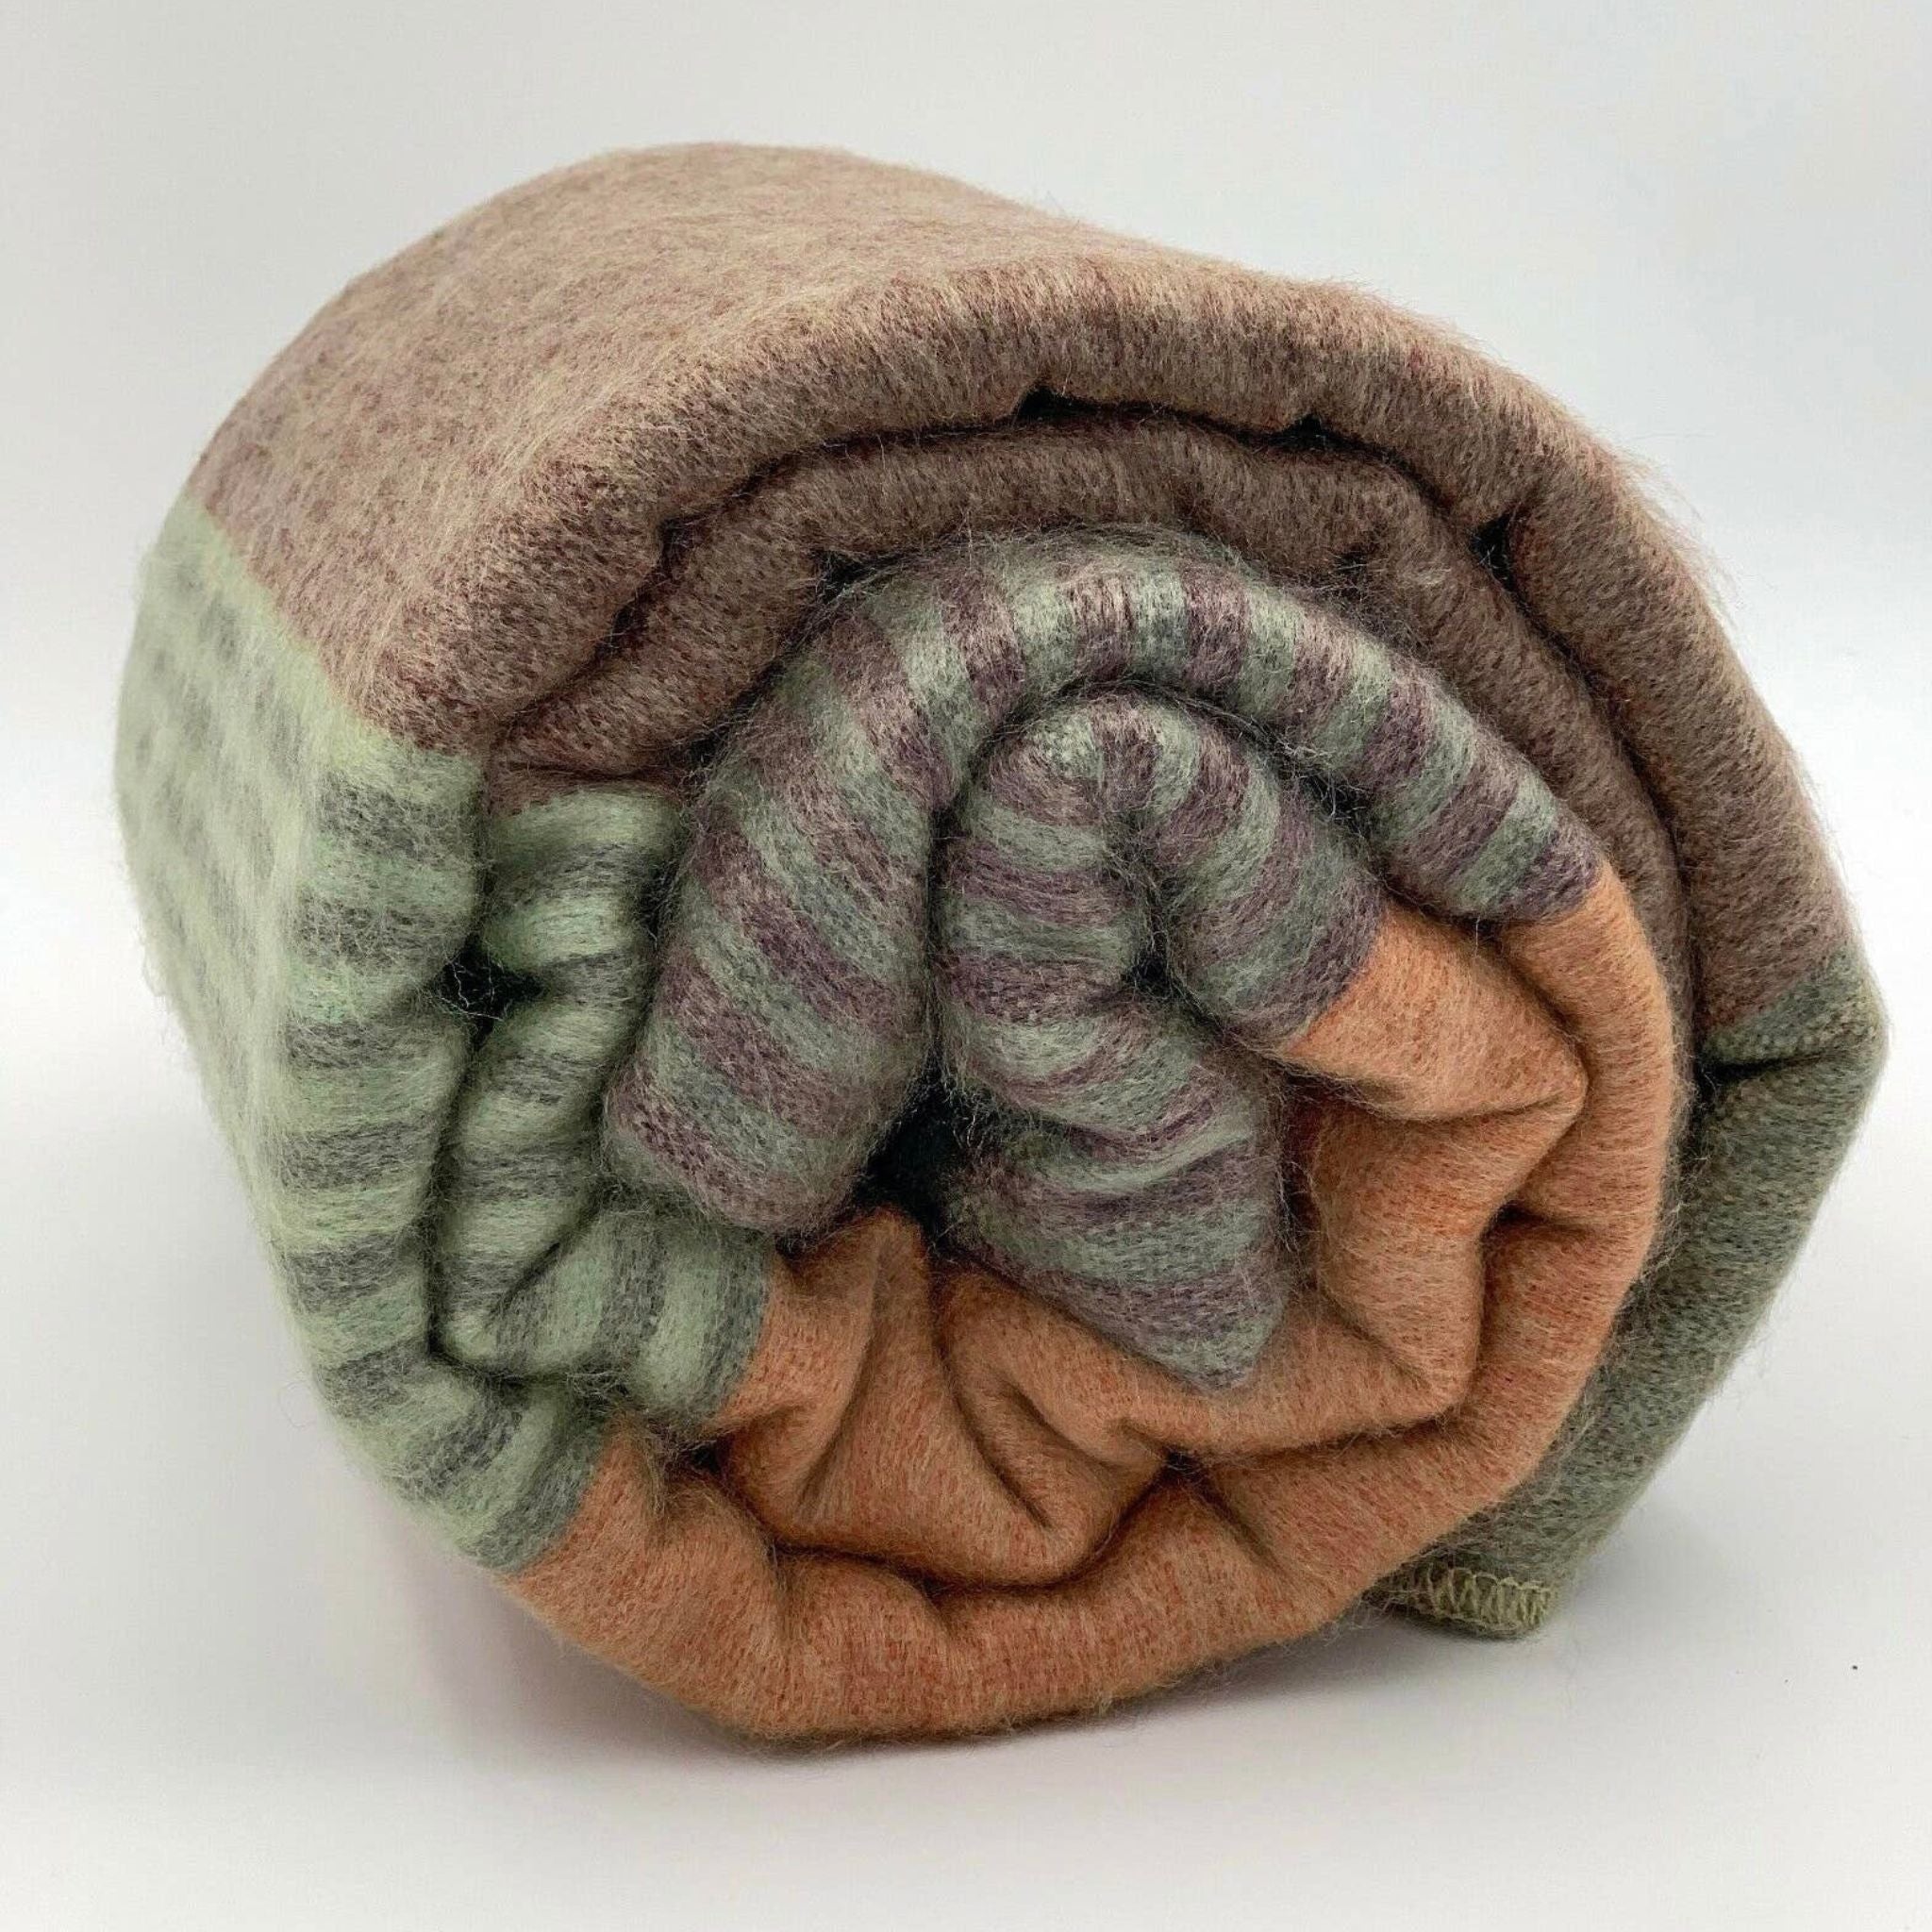 EDEN THROW BLANKET - Simply Elevated Home Furnishings 